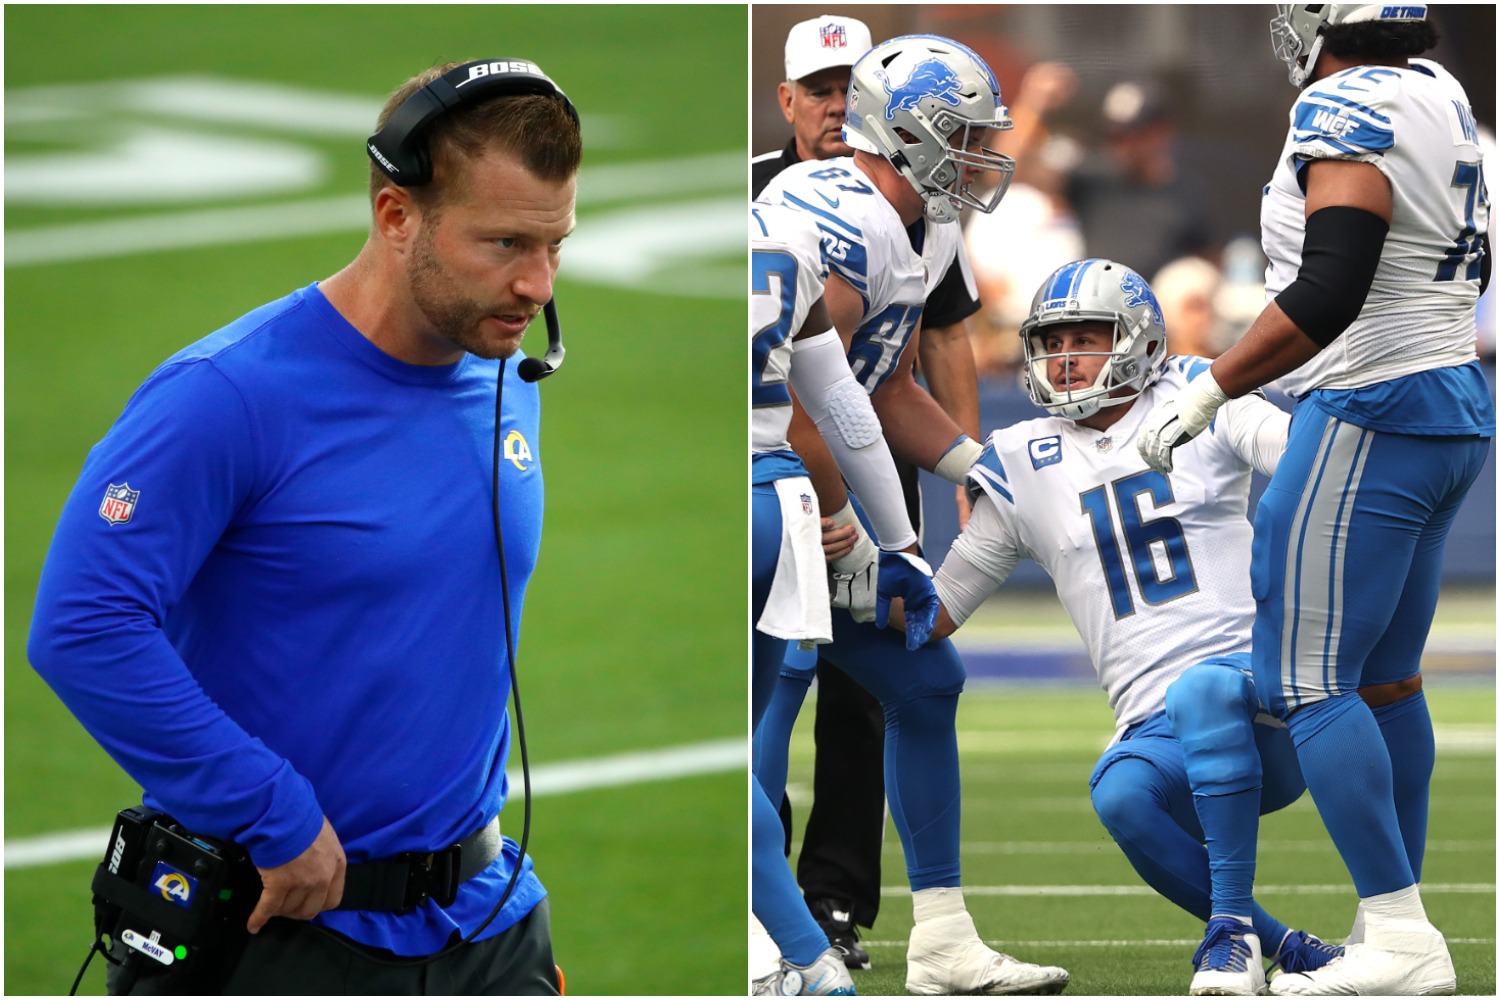 Los Angeles Rams head coach Sean McVay walks down the sidelines as Detroit Lions offensive linemen help quarterback Jared Goff get off the ground.